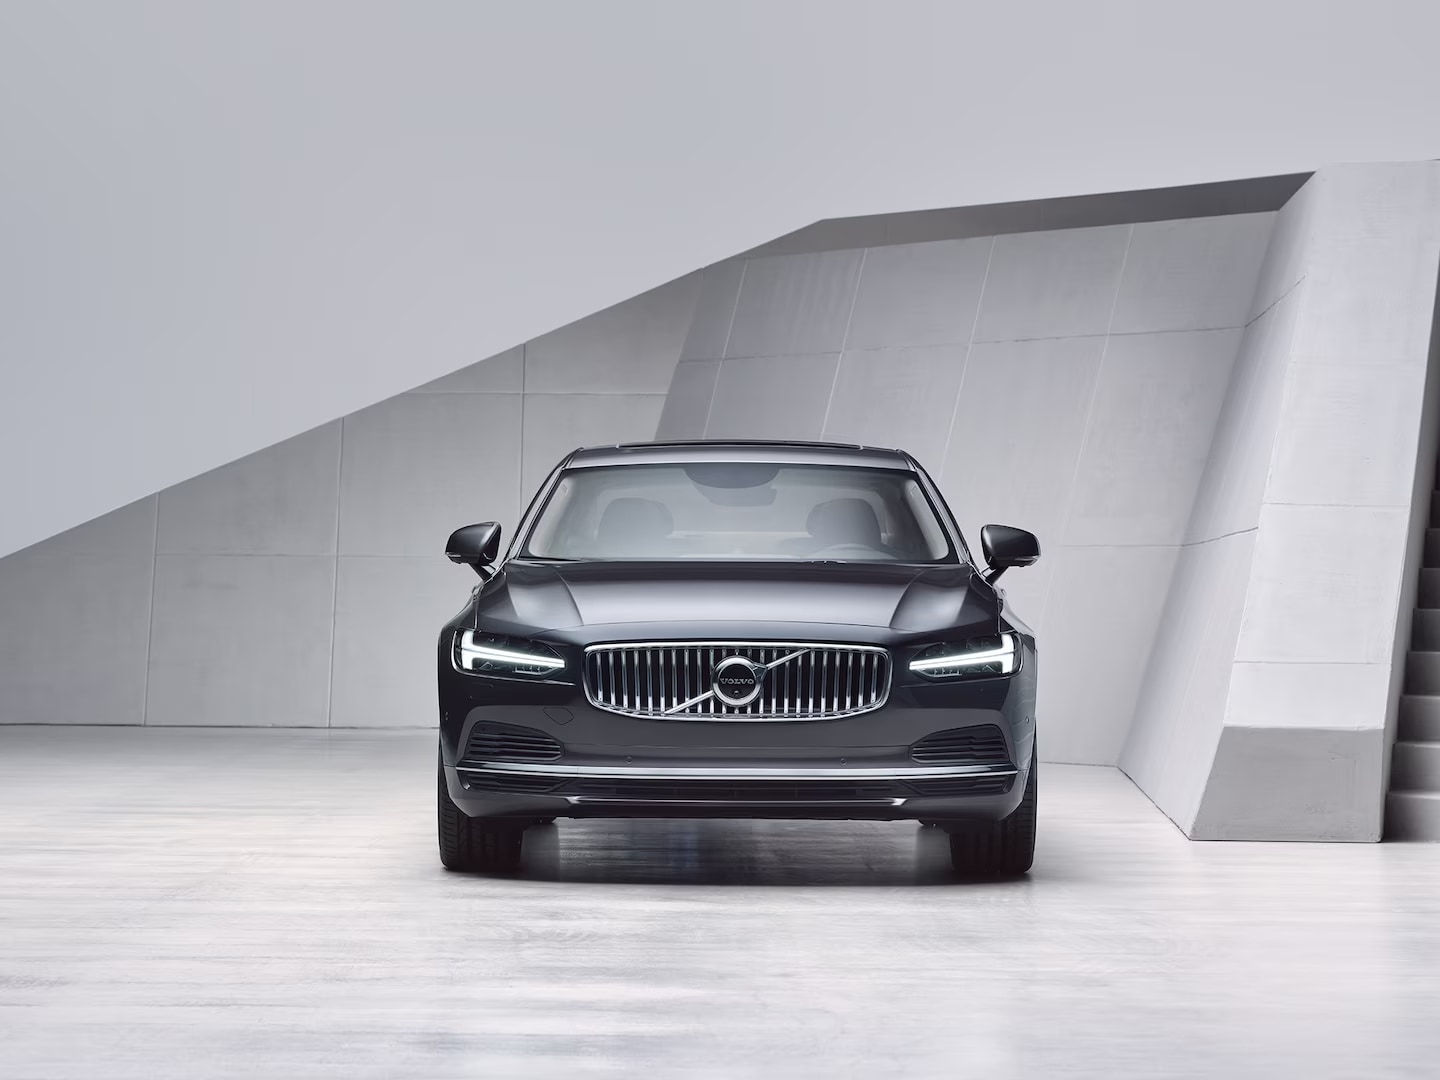 A Volvo S90 Recharge partially obscured by stairs.